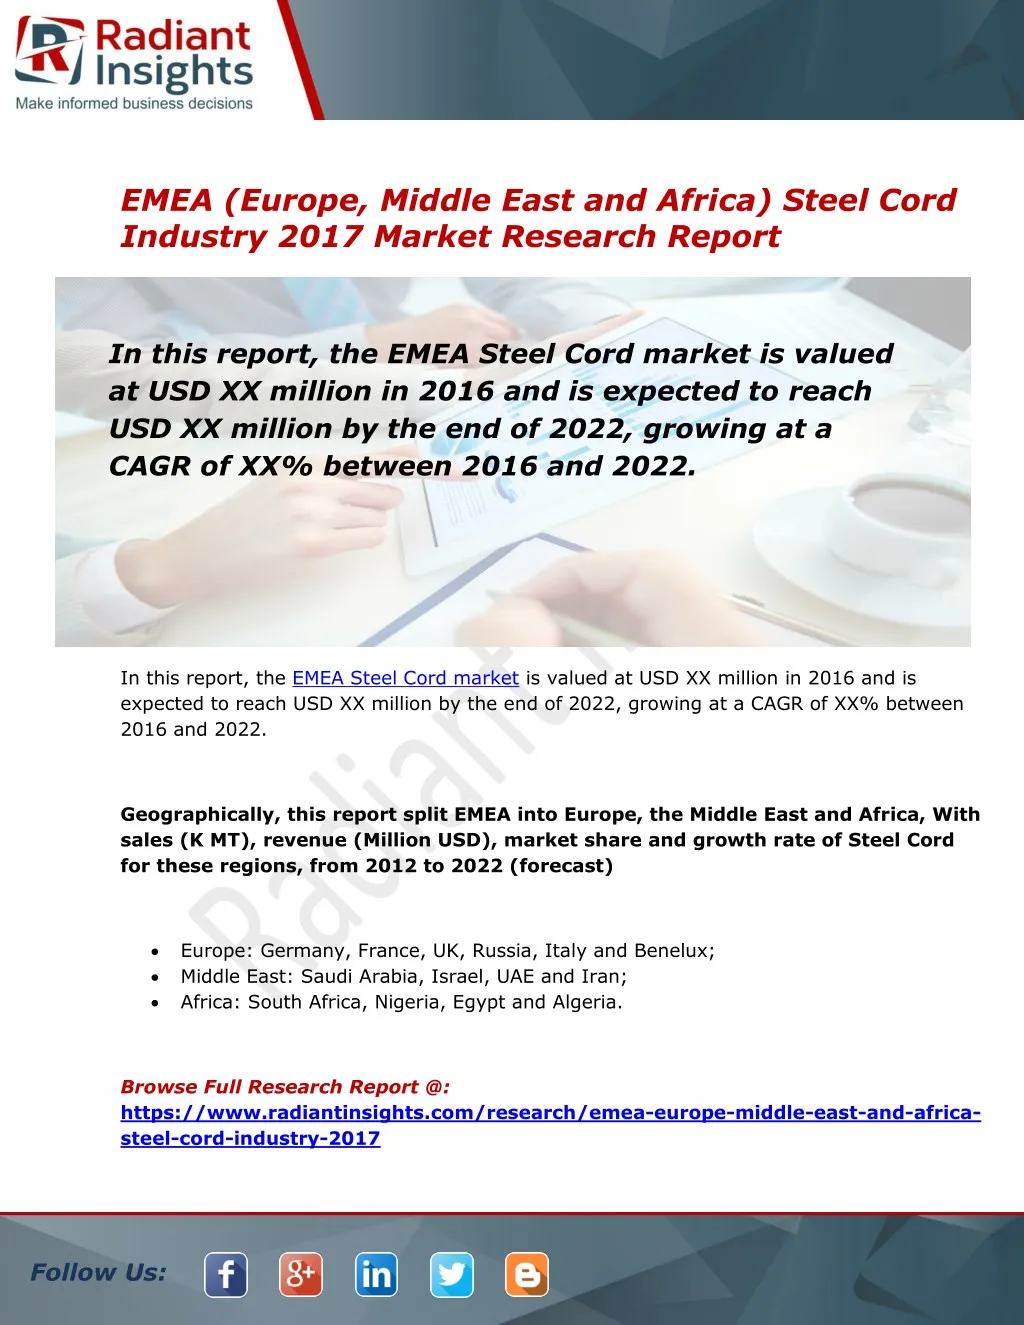 emea europe middle east and africa steel cord